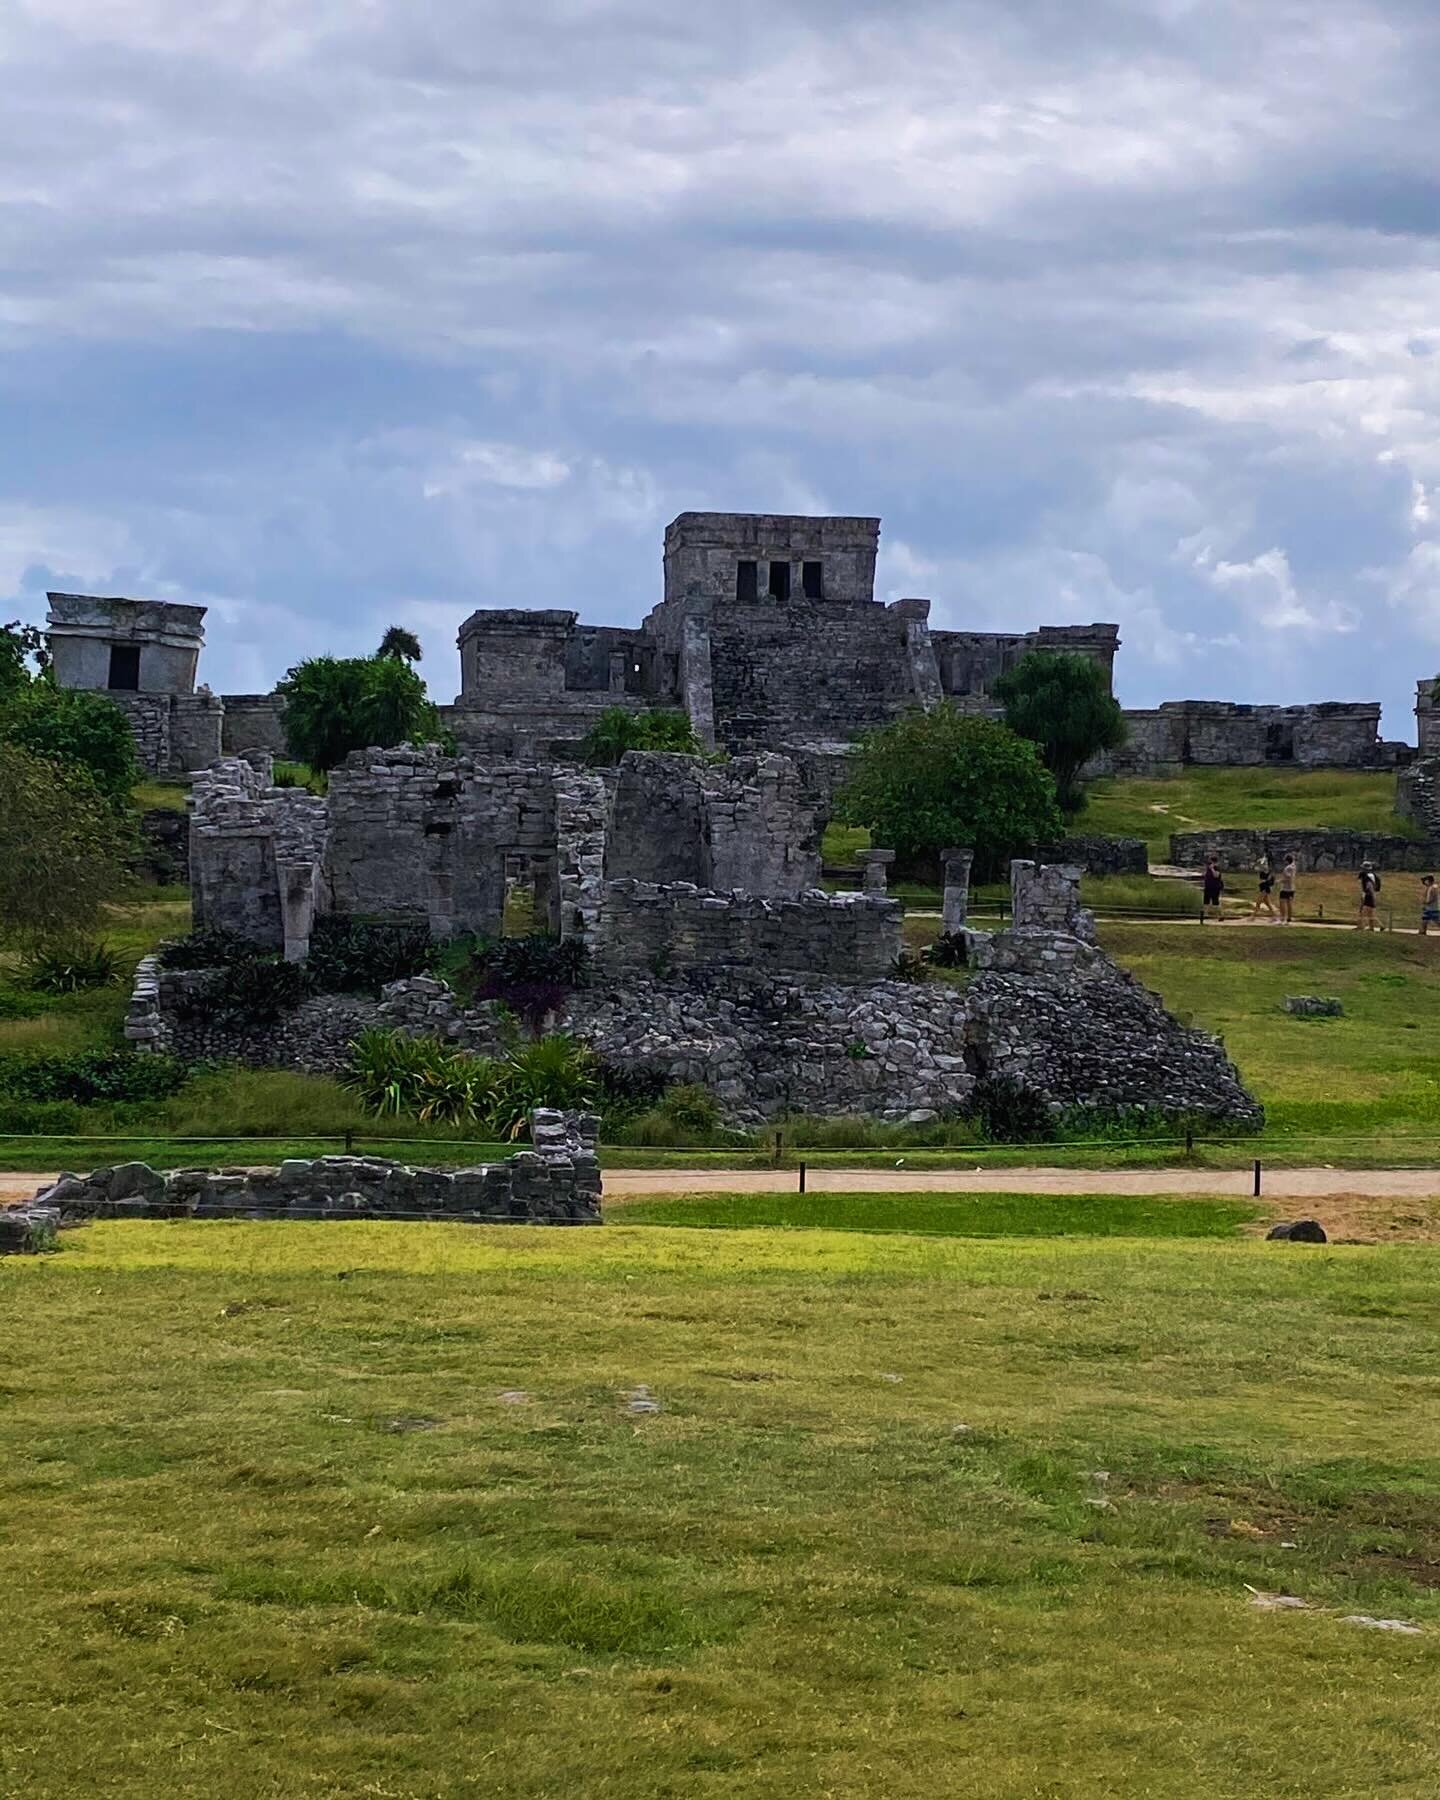 We love a good excursion &amp; one of our absolute favorites is the Mayan ruins. There are various Mayan ruin sites located near the Riviera Maya &amp; you can even take a day trip to the grandest of them all...Chichen Itza, which is one of the New 7